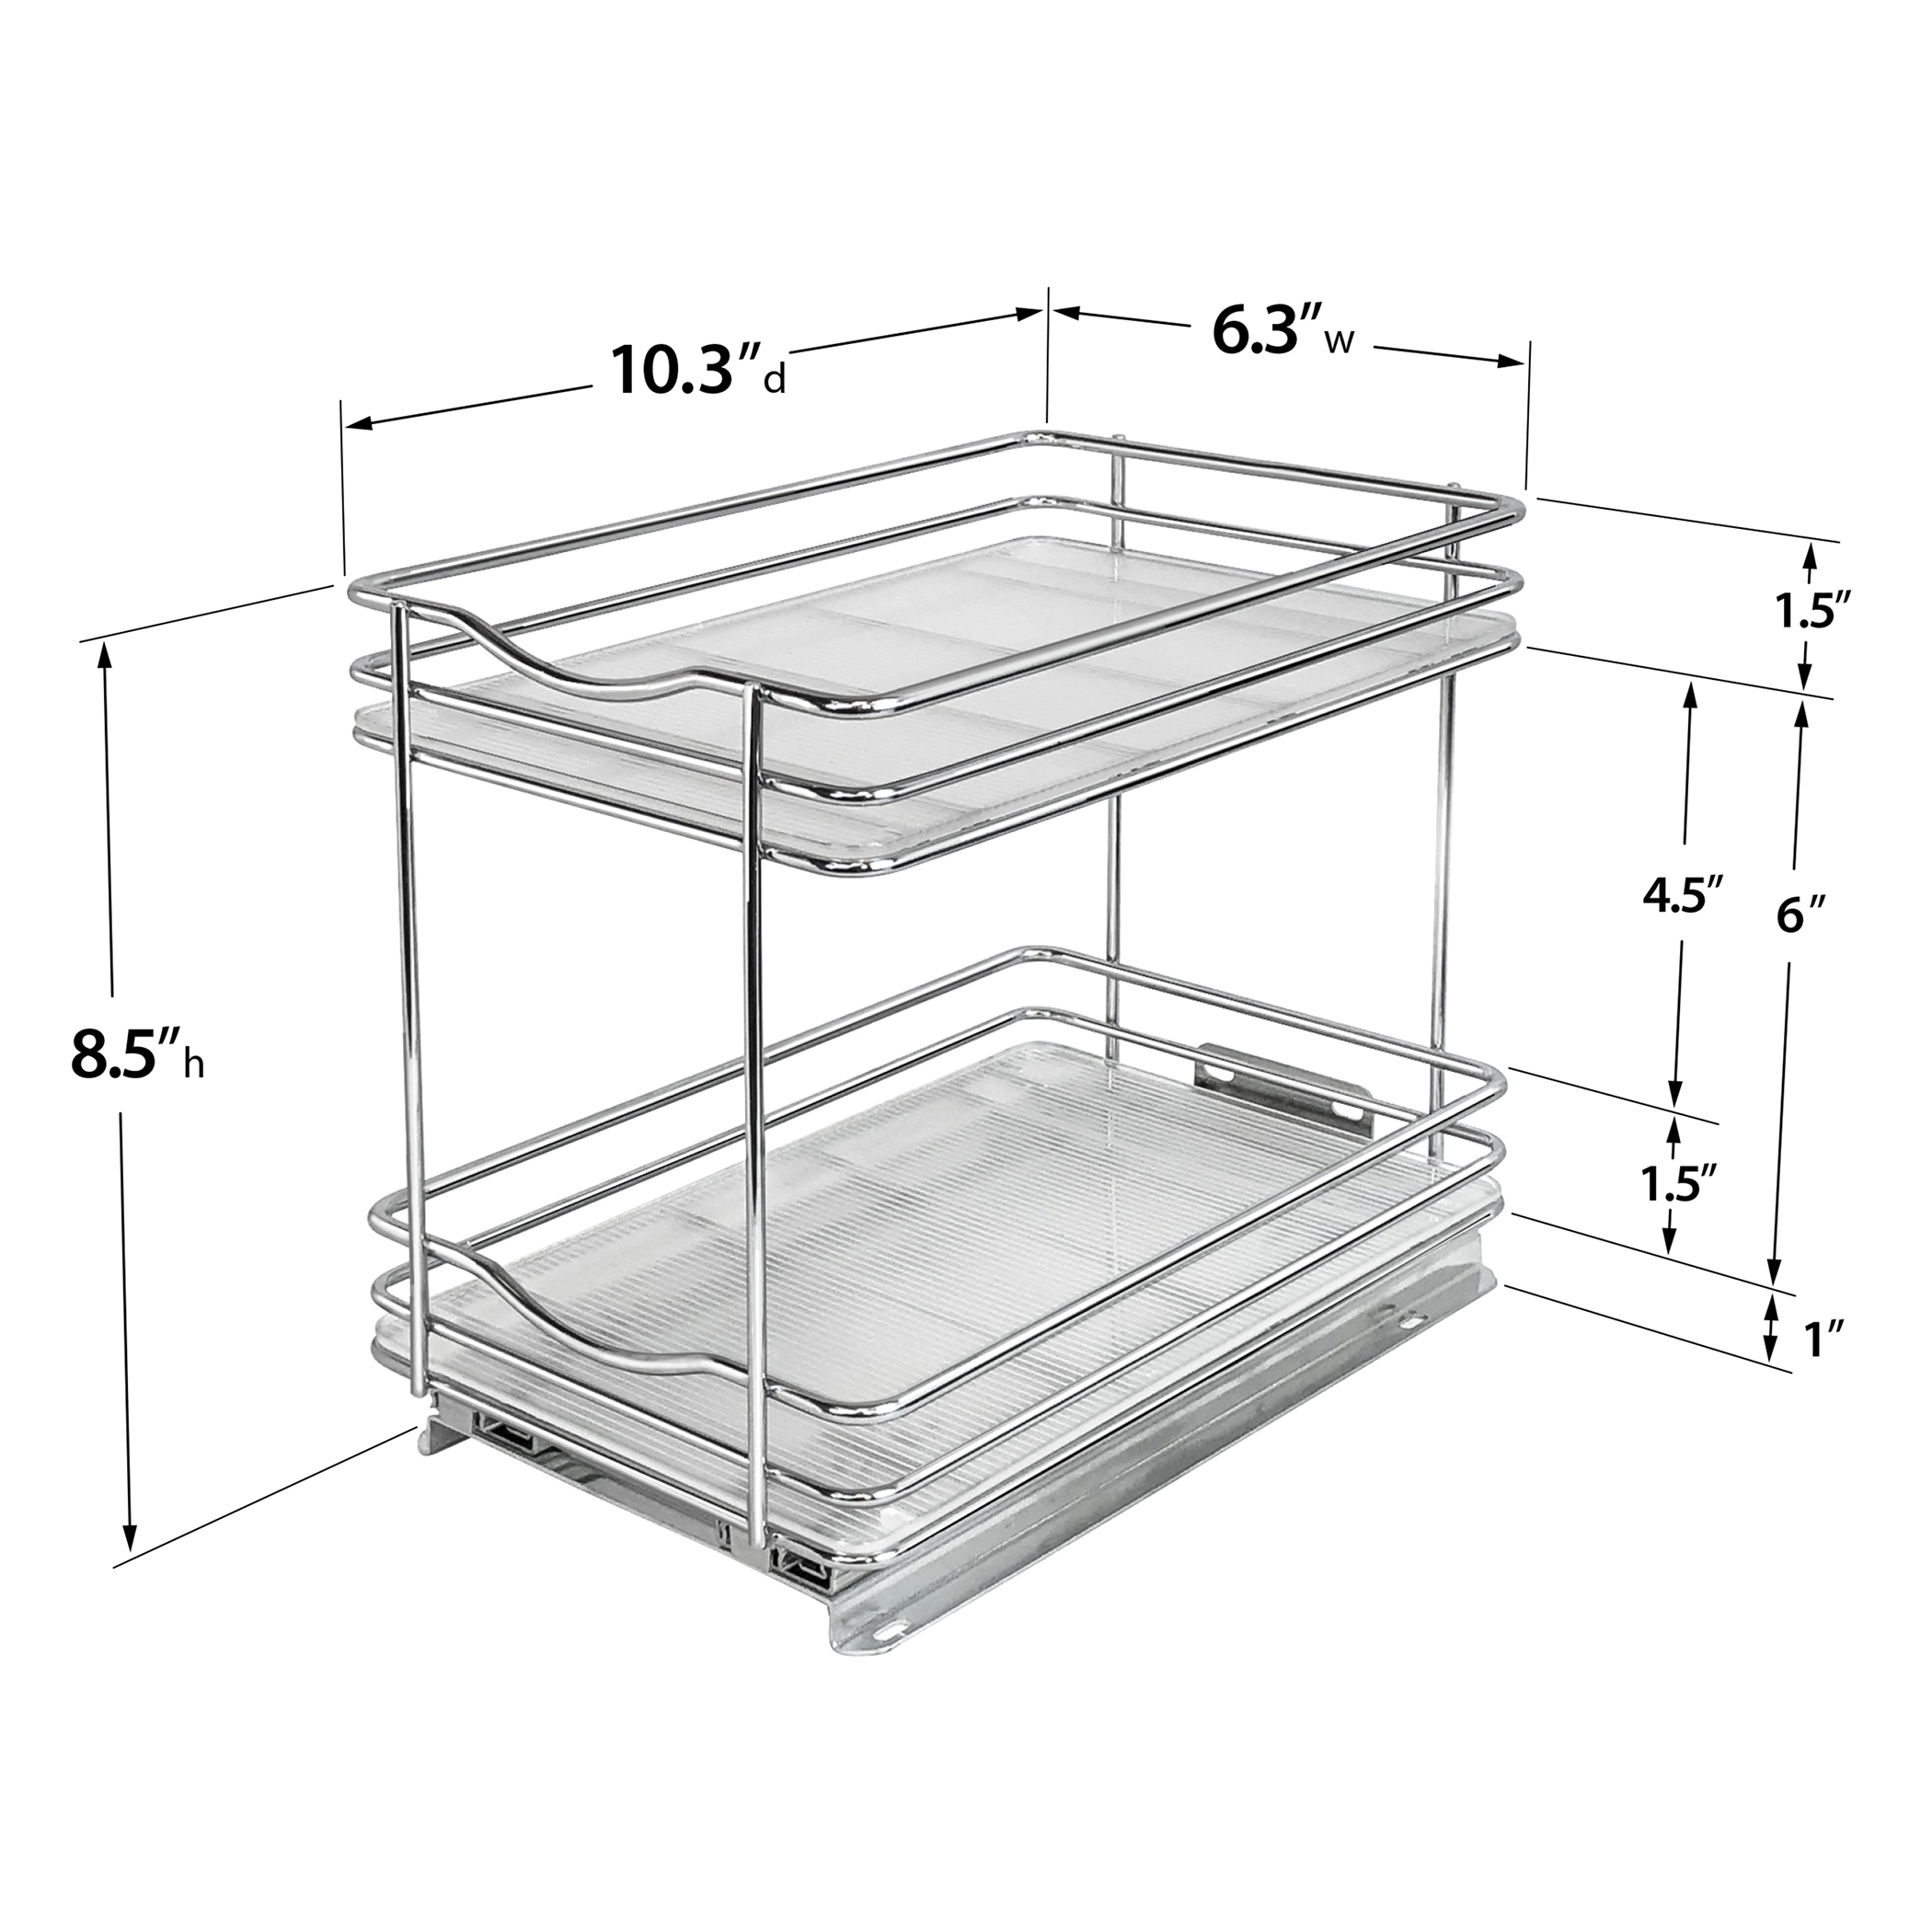 Spice Organizer Two Tier, Lynk Professional Slide Out Double Spice Rack Upper Cabinet Organizer